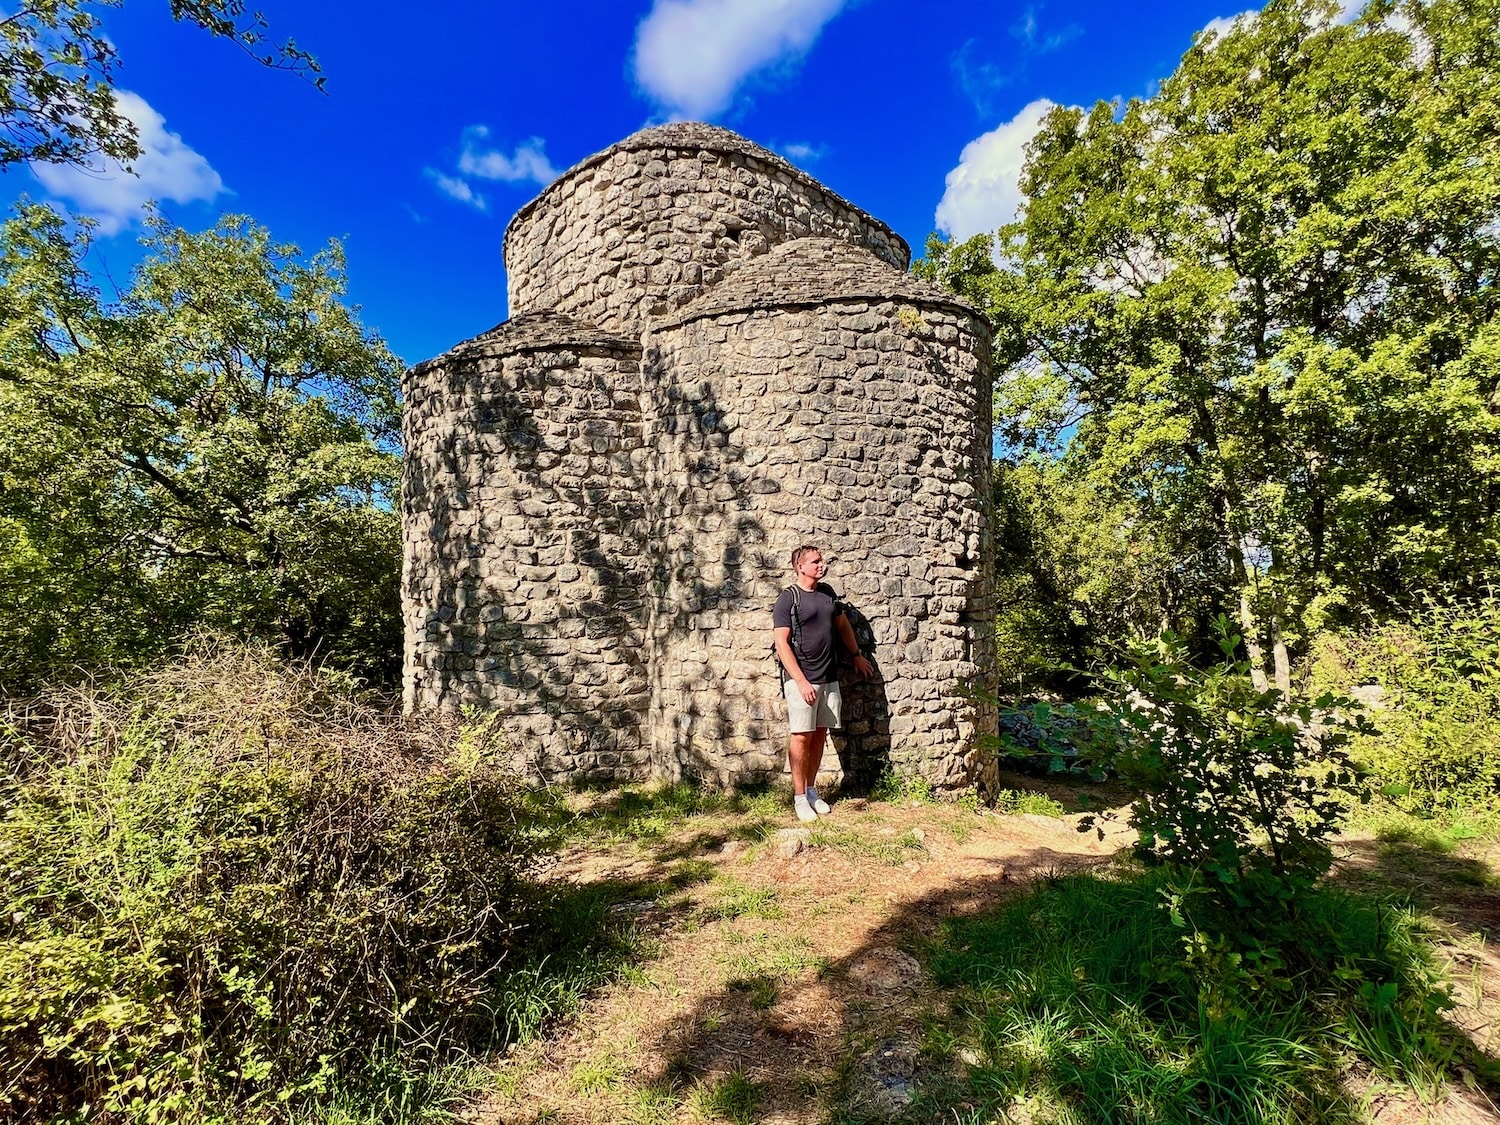 The Crkva sv. Krševan – an abandoned medieval church is located in the west of the island. Photo: Sascha Tegtmeyer Hiking on Krk experience report tips